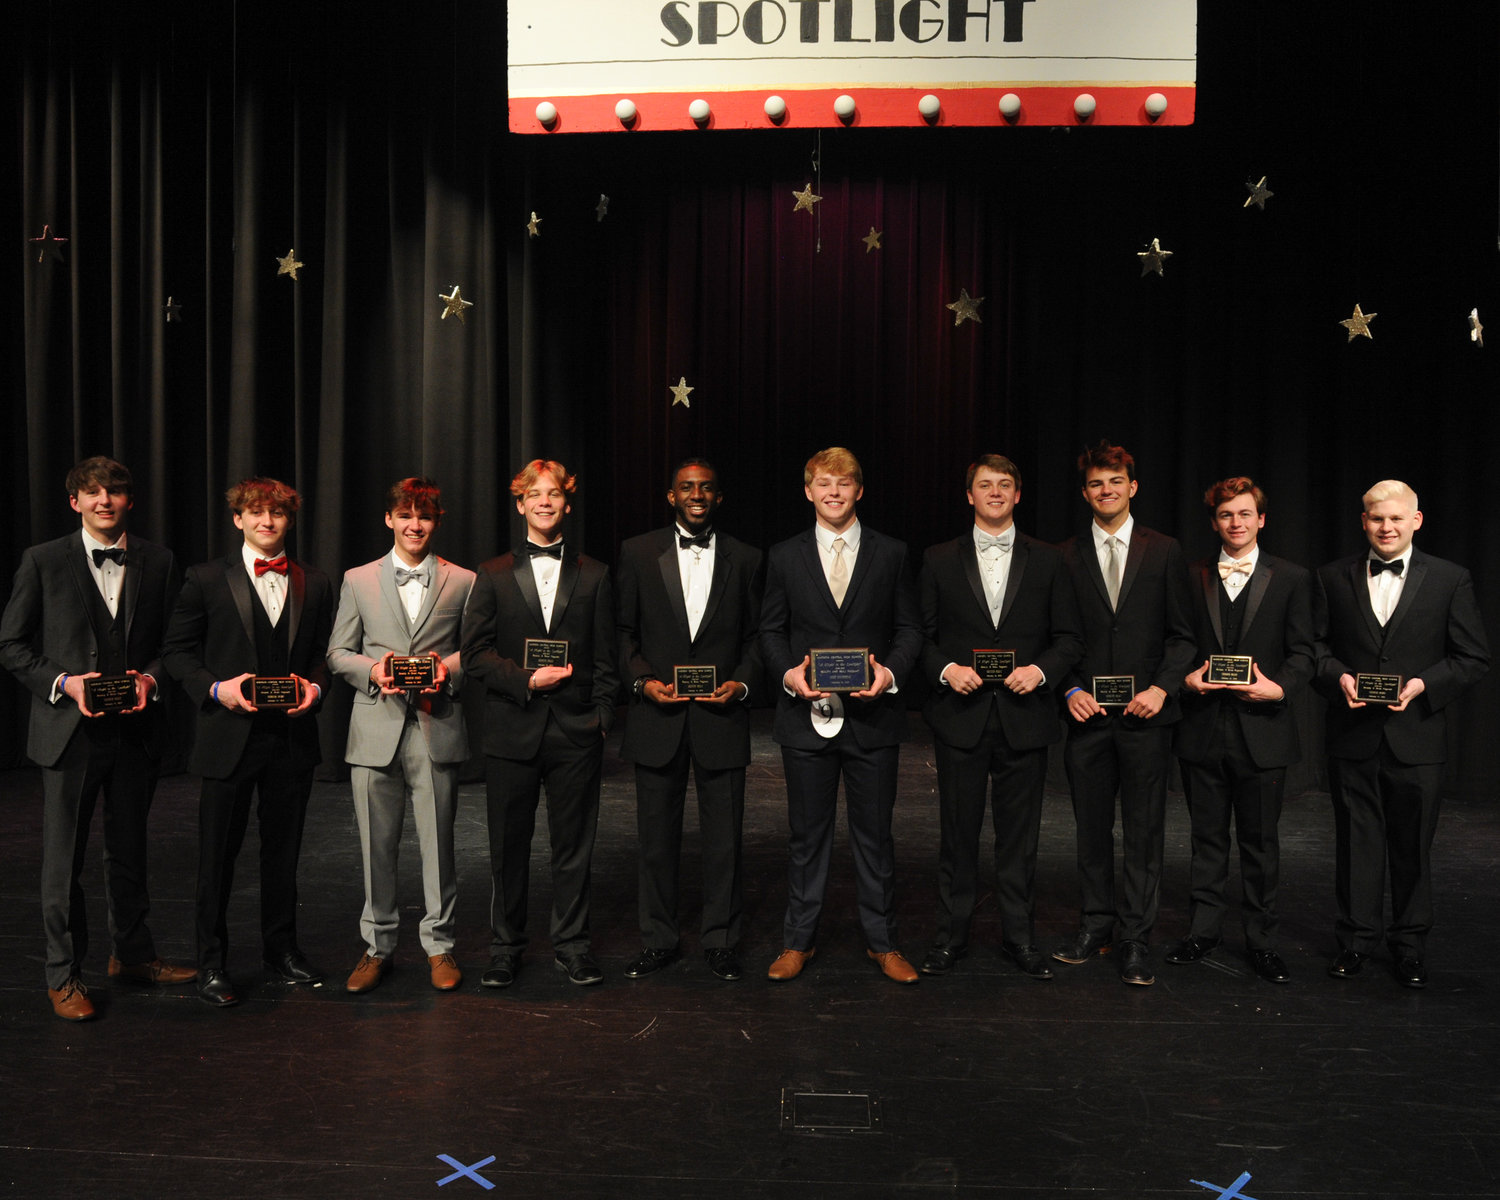 Madison Central High School hosted its annual Beauty and Beau pageant the week of February 8. Friday, February 12 was senior night. Pictured are the beau winners. Left to right are beaus Walker Rogillio, Christian Contreras, Joe Gallaspy, Rob Embry, Carl White, most handsome Chandler Welgos, beaus Harrison Bruce, John Henson, Robert Tickner and Cameron Duncan.